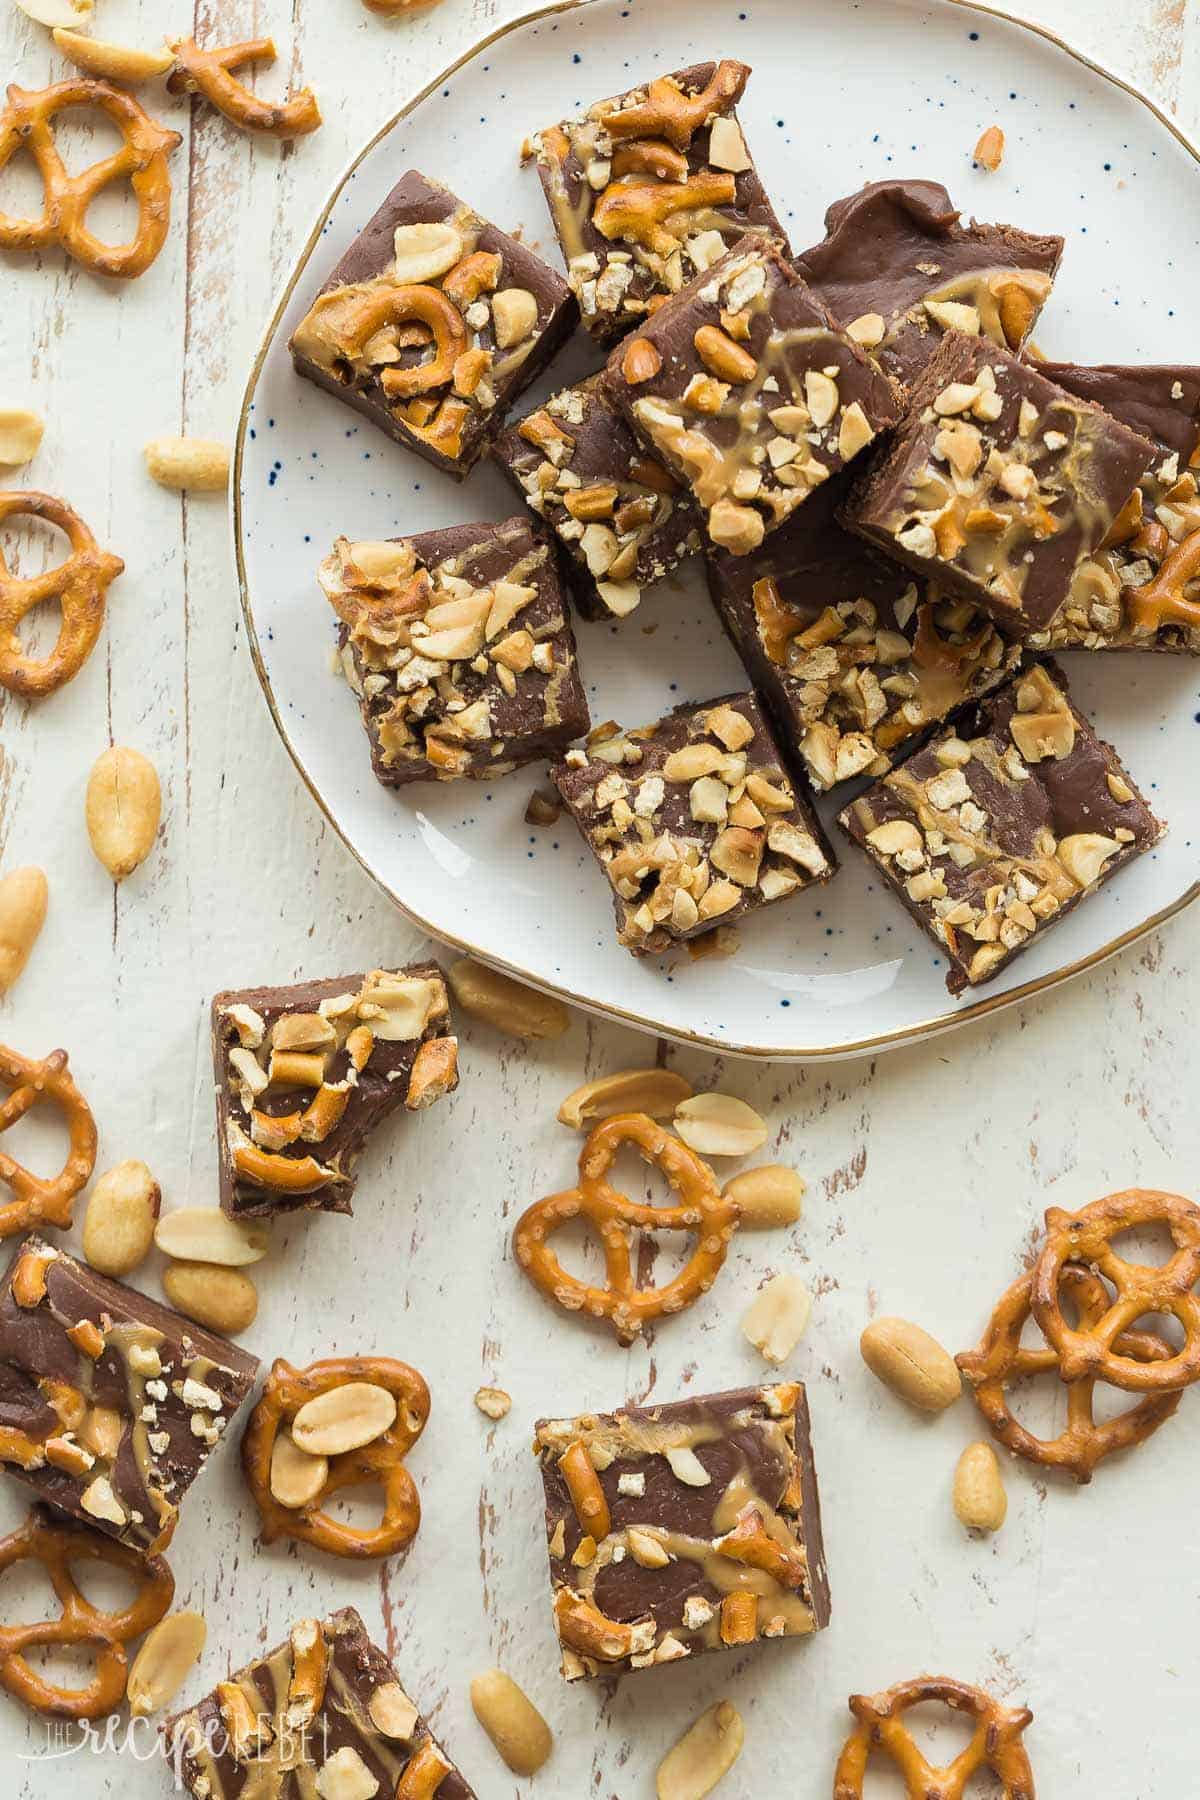 This Peanut Butter Chocolate Fudge with Pretzels is a sweet and salty Christmas candy that is SO easy to make! Just a few ingredients and no bake. Includes step by step recipe video. | easy dessert recipe | no bake dessert | Christmas candy | Christmas recipe | chubby hubby